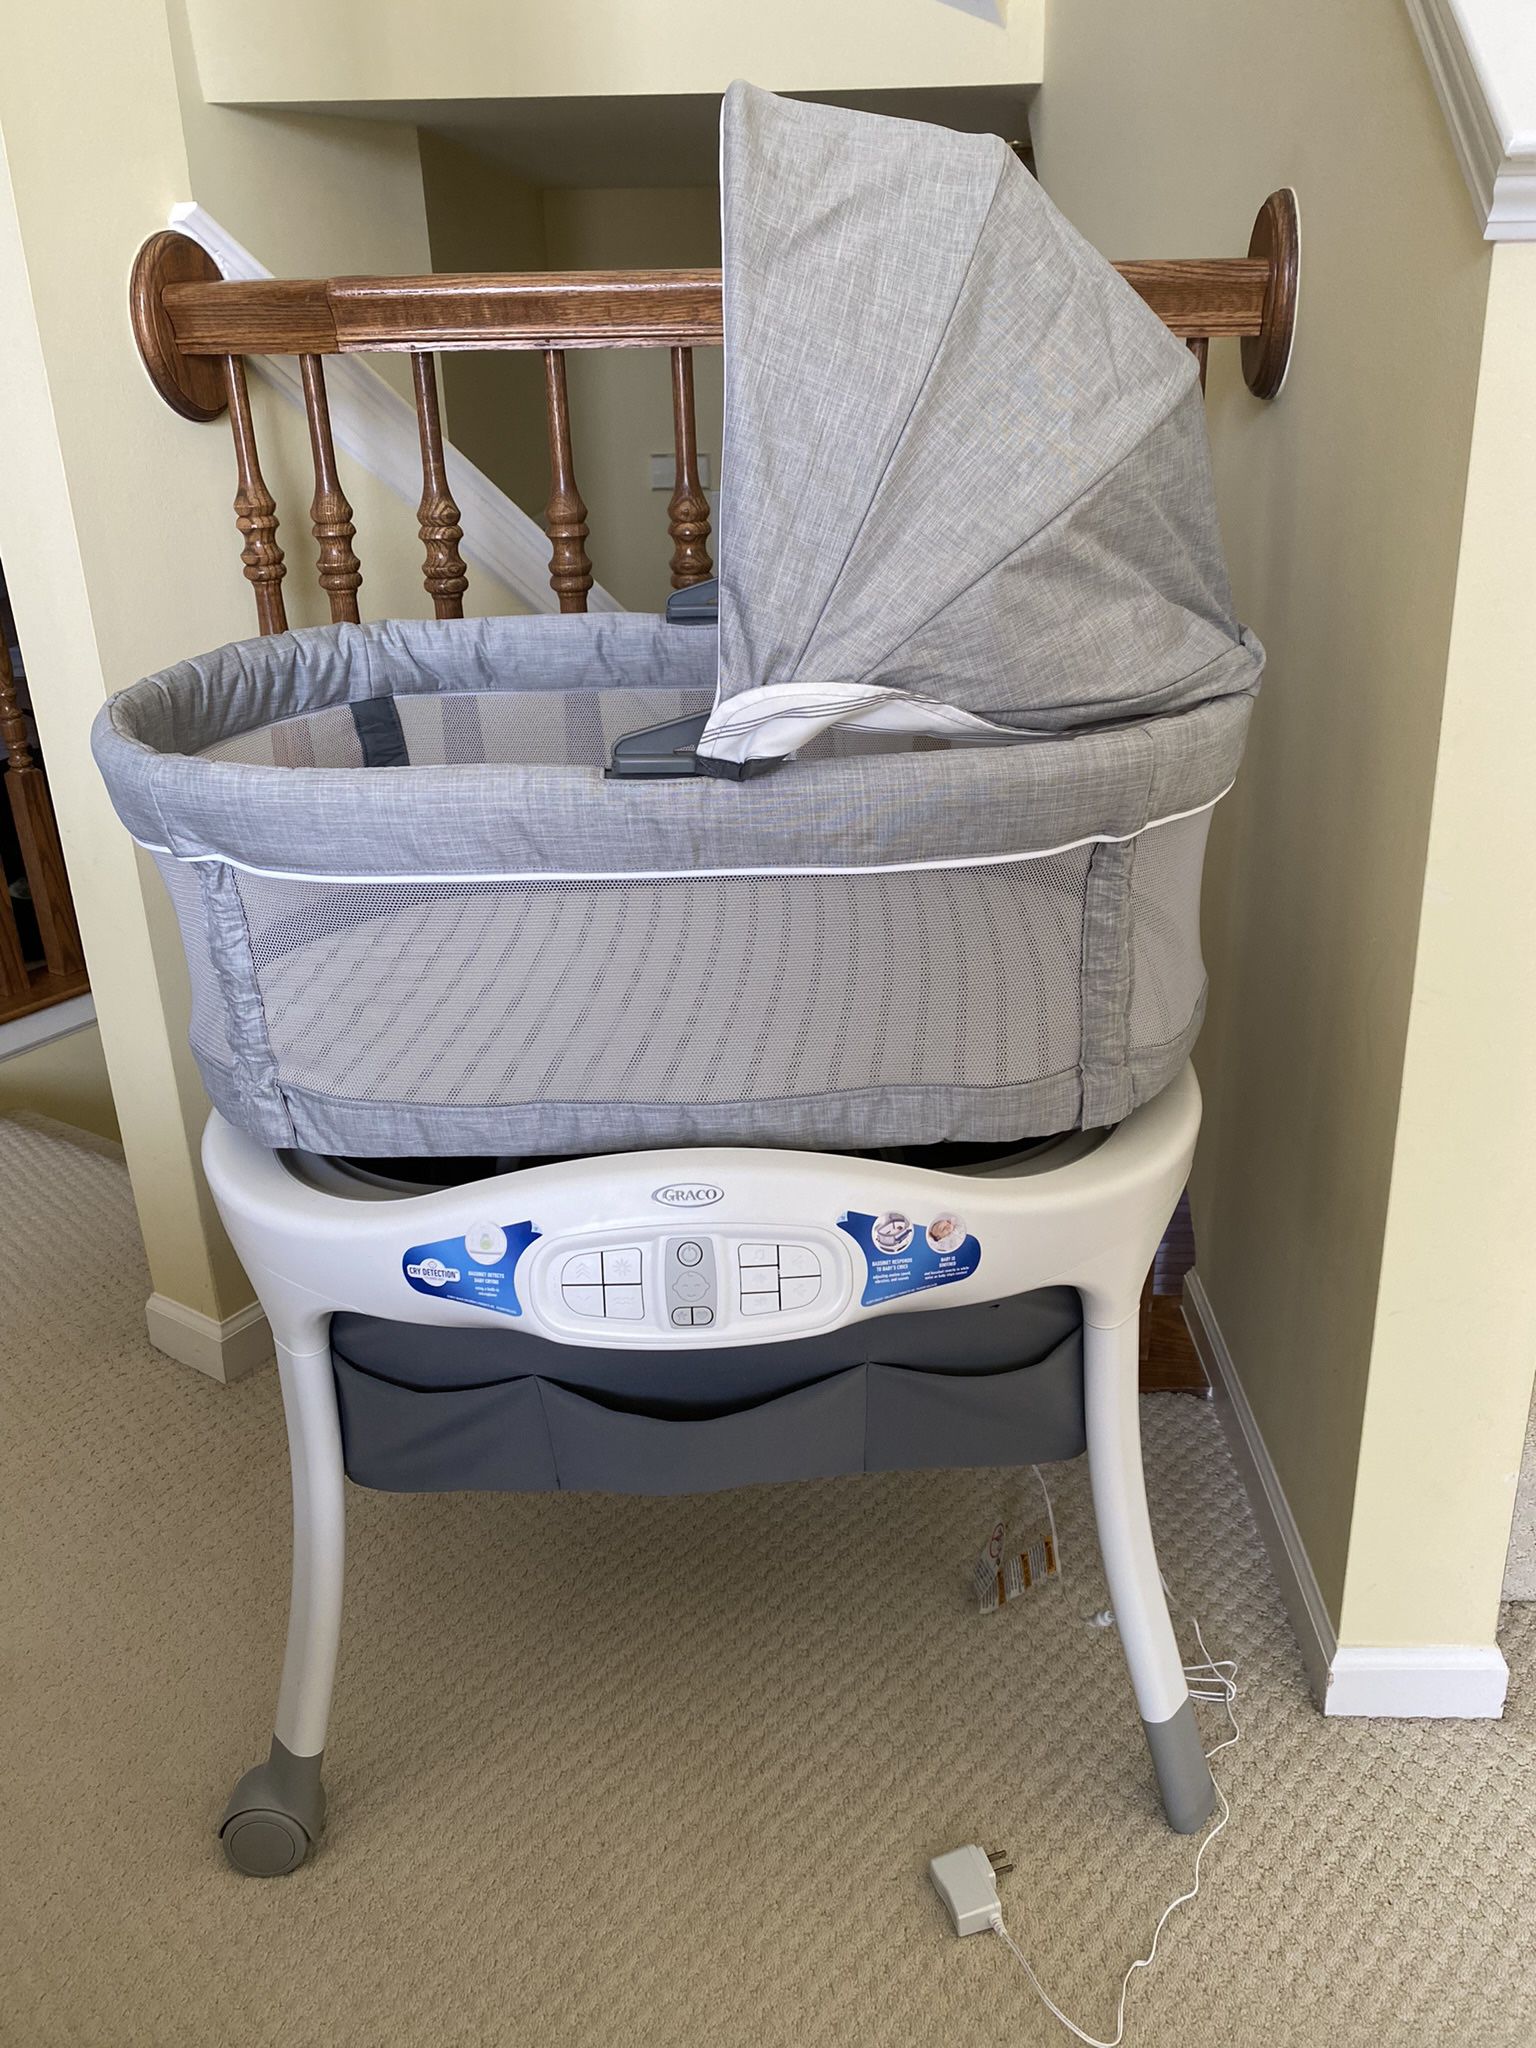 Gently Used Baby Bassinet, Swing, & Portable Bassinet 